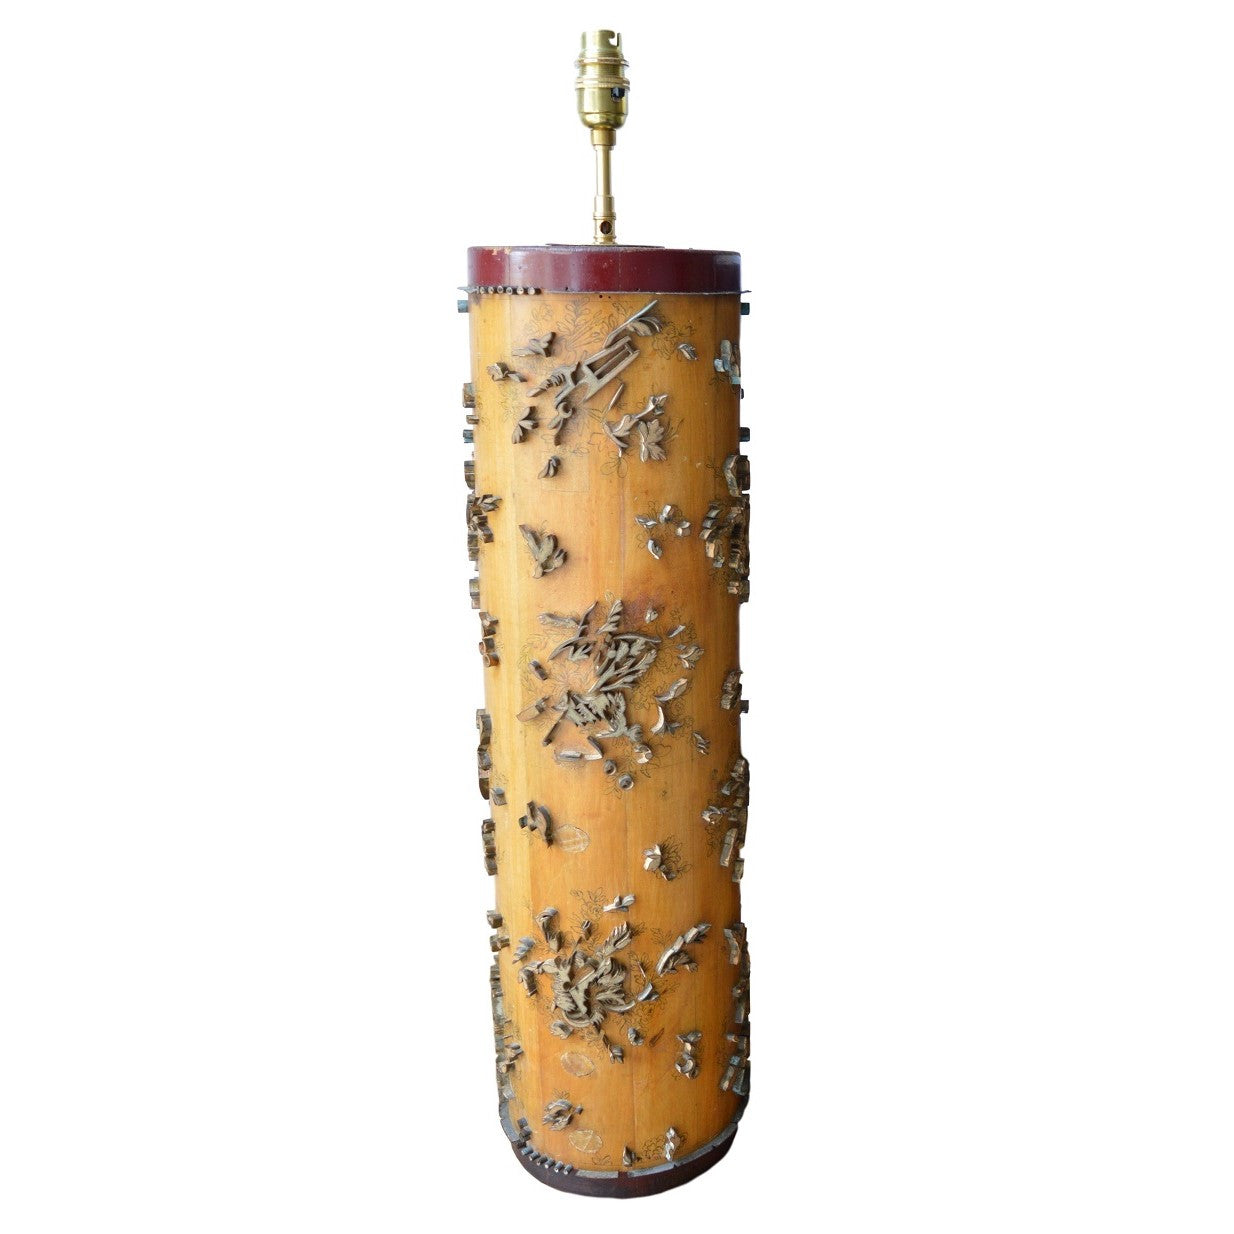 Munro and Kerr lamp base antique floral wallpaper roller from Belgium